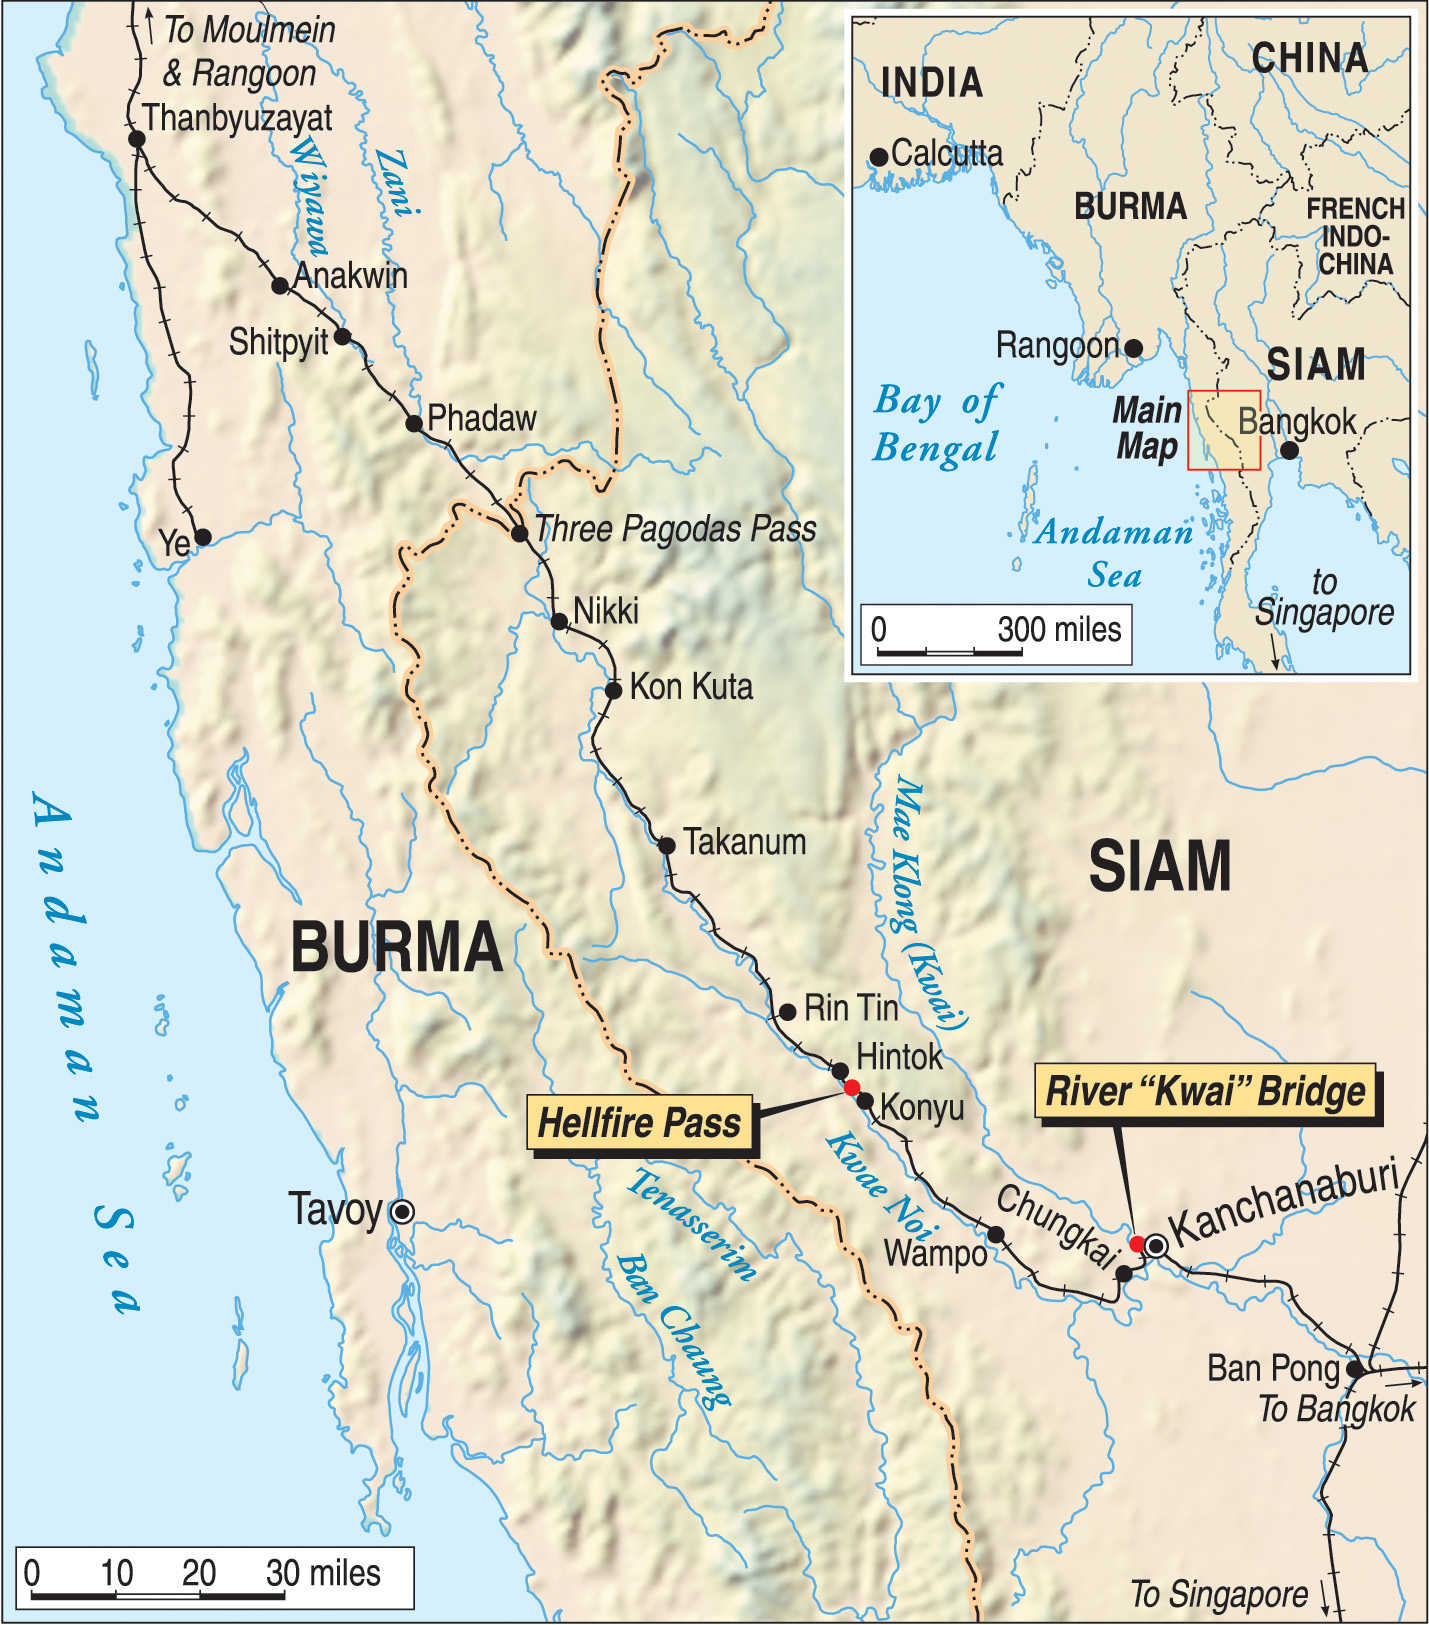 The route of the Burma-Thailand railway and location of the infamous bridge. The total length of the line was 258 miles through impassable terrain and an inhospitable climate, and took eight months for the POWs to build. 